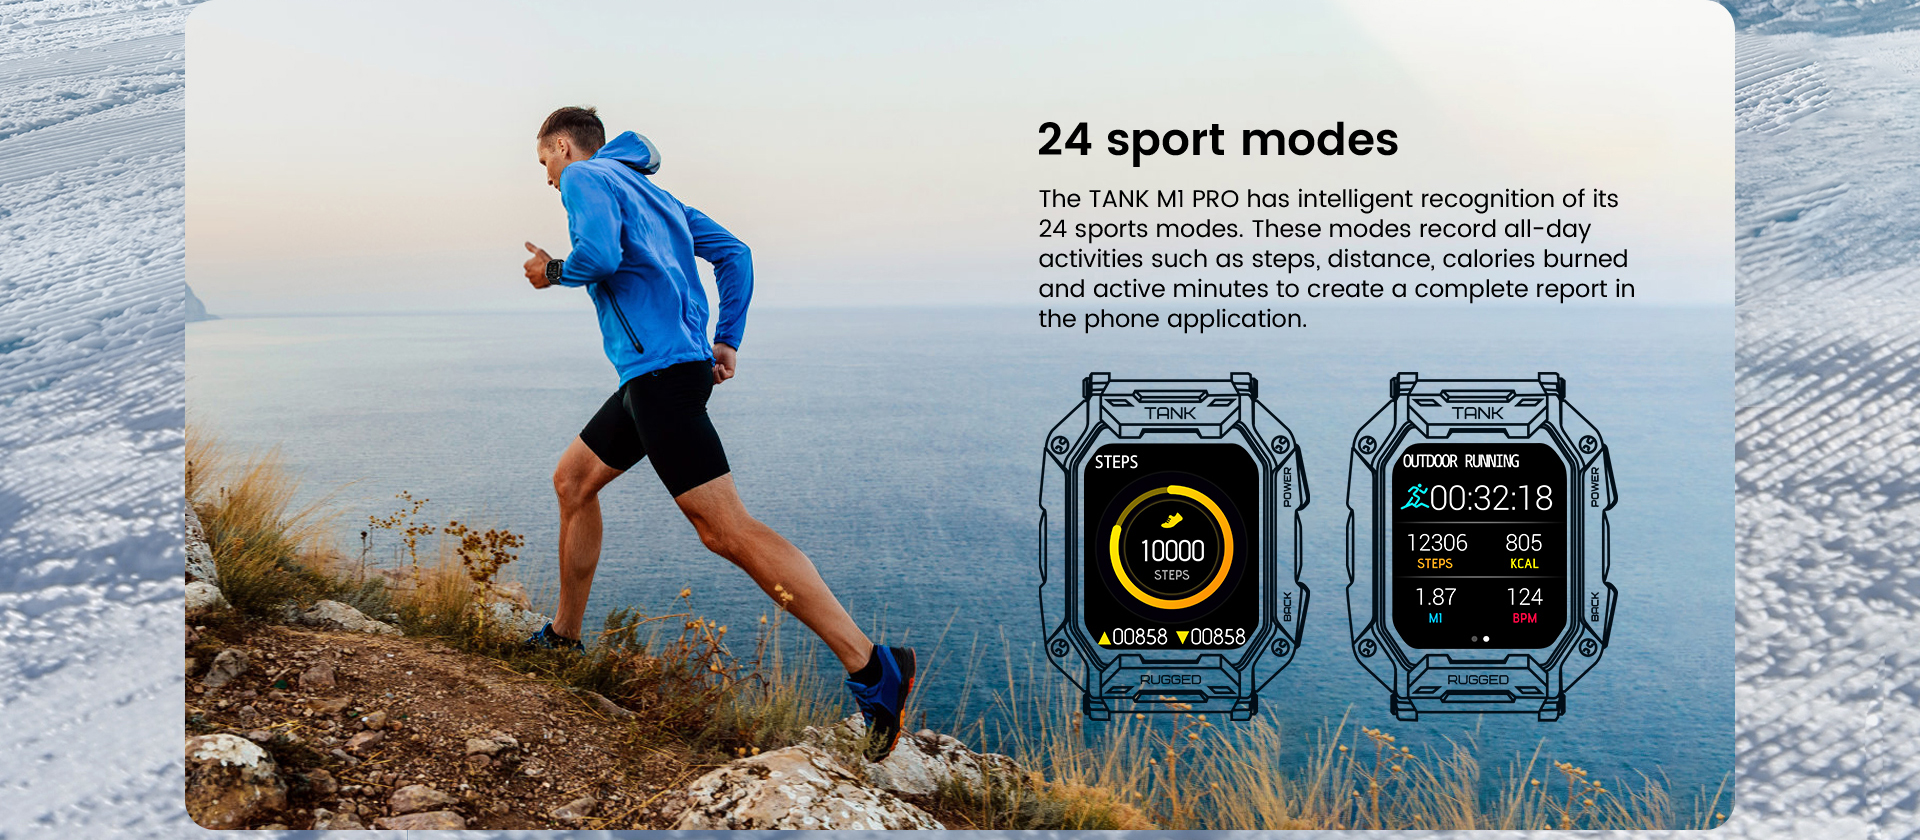 KOSPET-TANK-M1-Pro-Three-proof-Rugged-Outdoor-Fitness-Tracker-bluetooth-Call-24h-Heart-Rate-SpO2-Mon-1968724-8